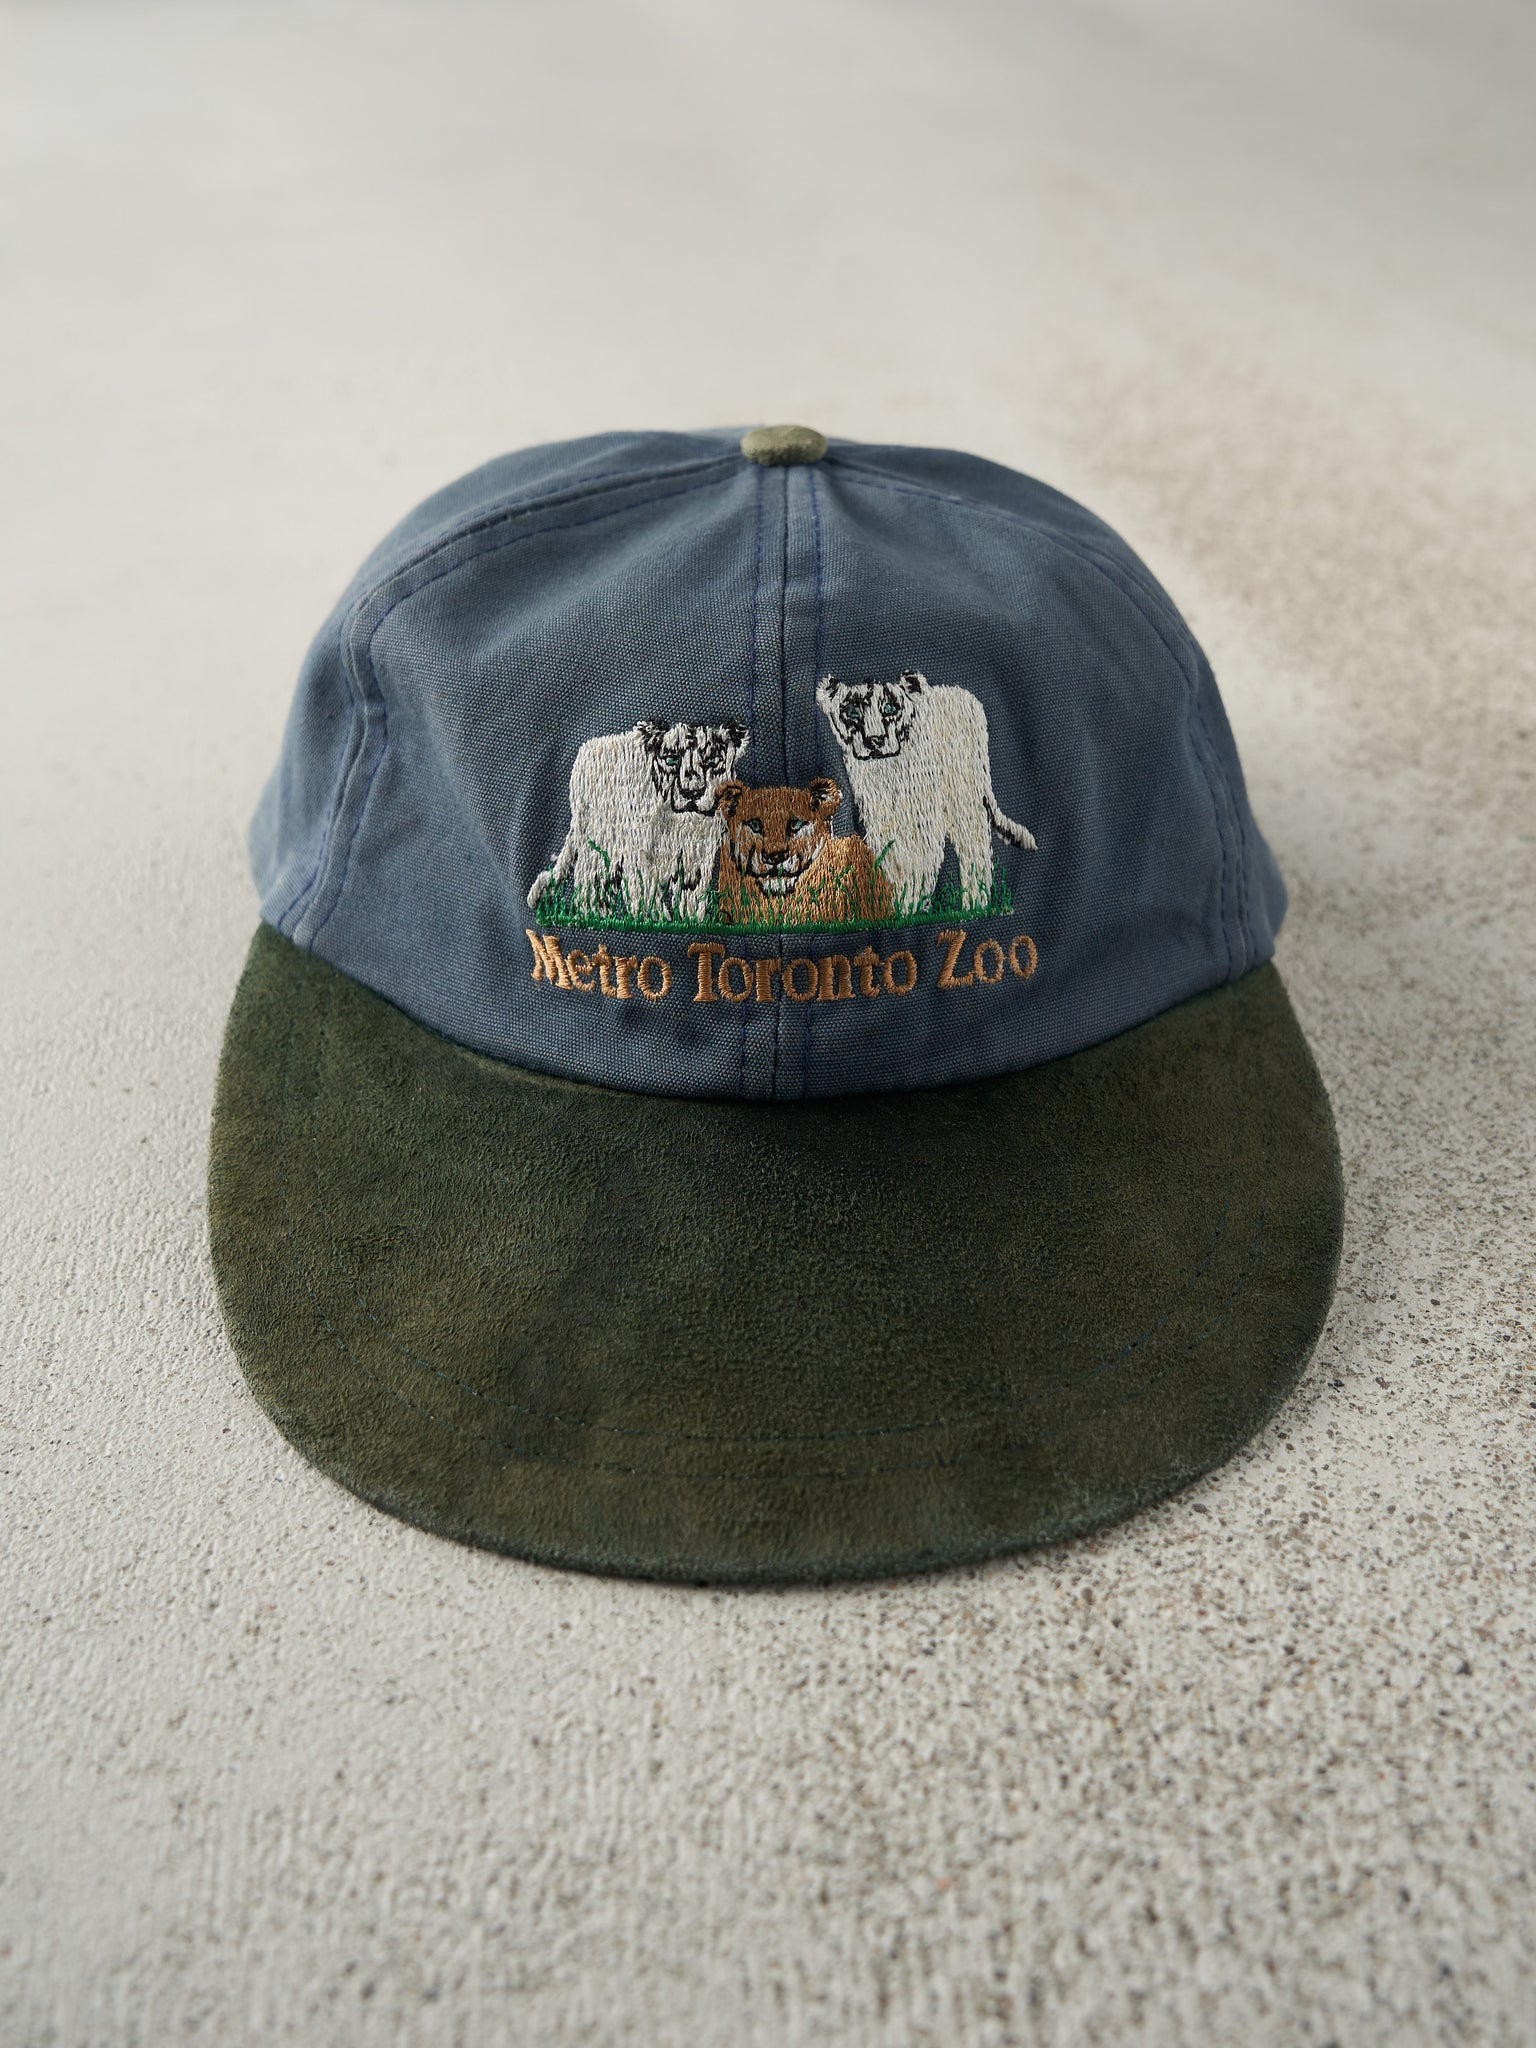 Vintage 80s Blue Embroidered Metro Toronto Zoo Leather Strap Back